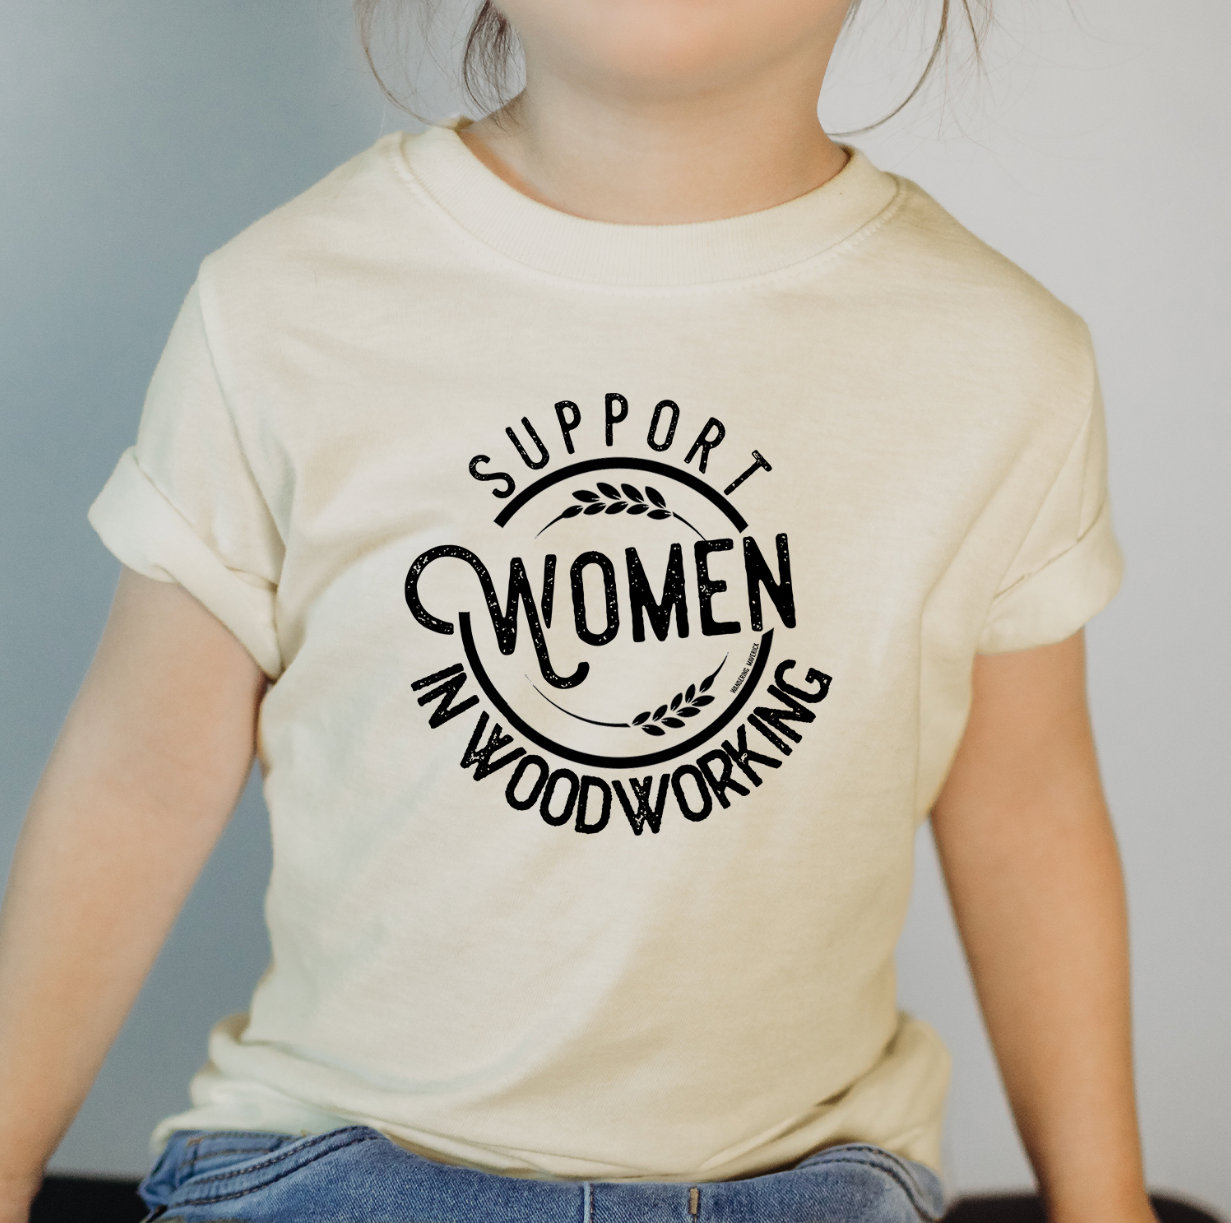 Support Women In Woodworking One Piece/T-Shirt (Newborn - Youth XL) - Multiple Colors!